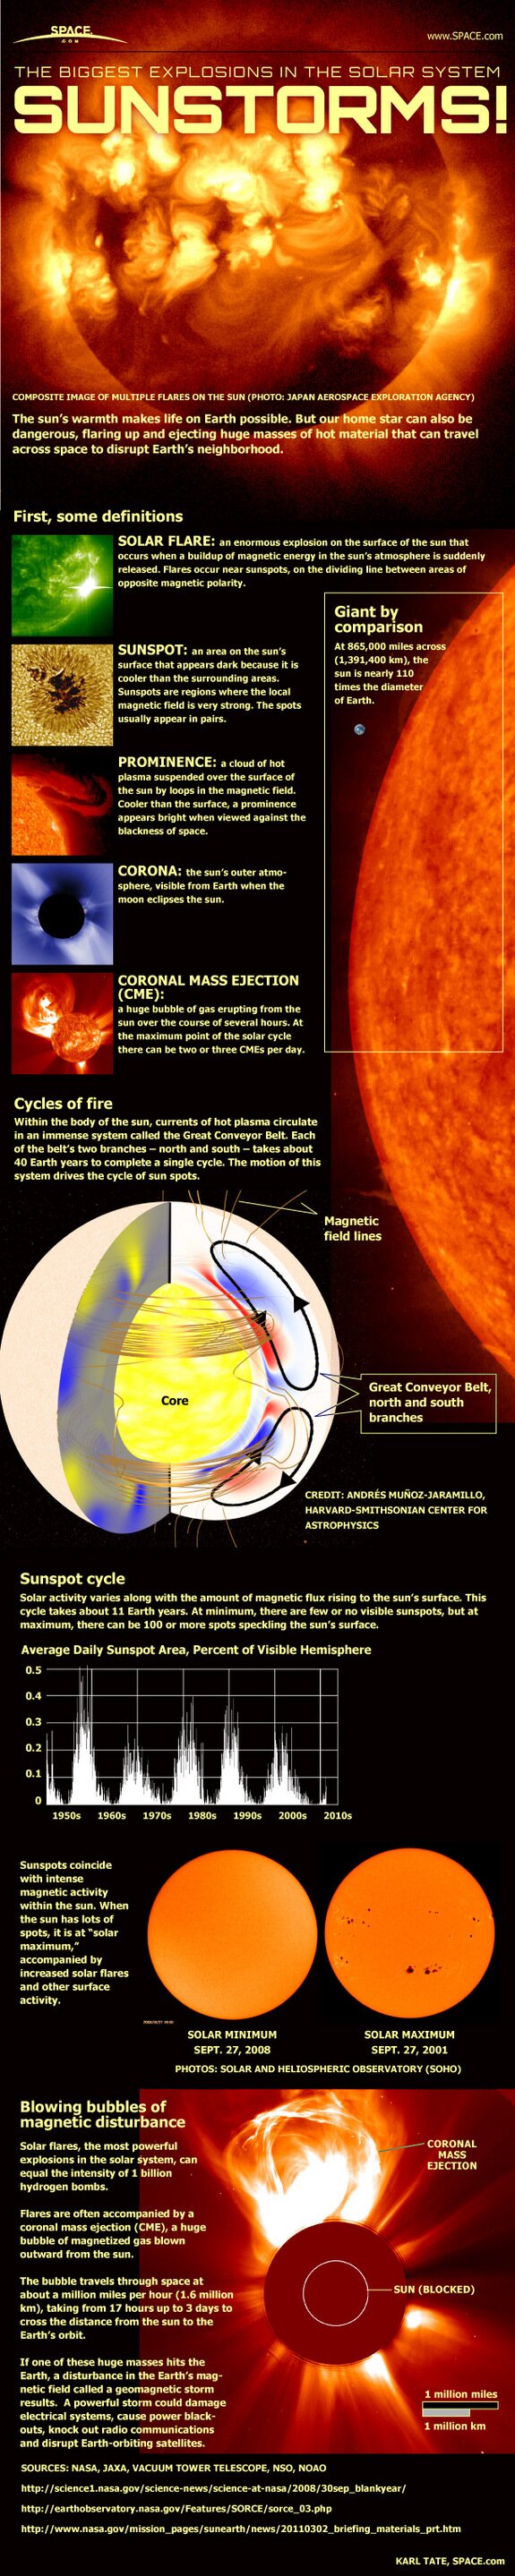 Explanation of Sunstorms